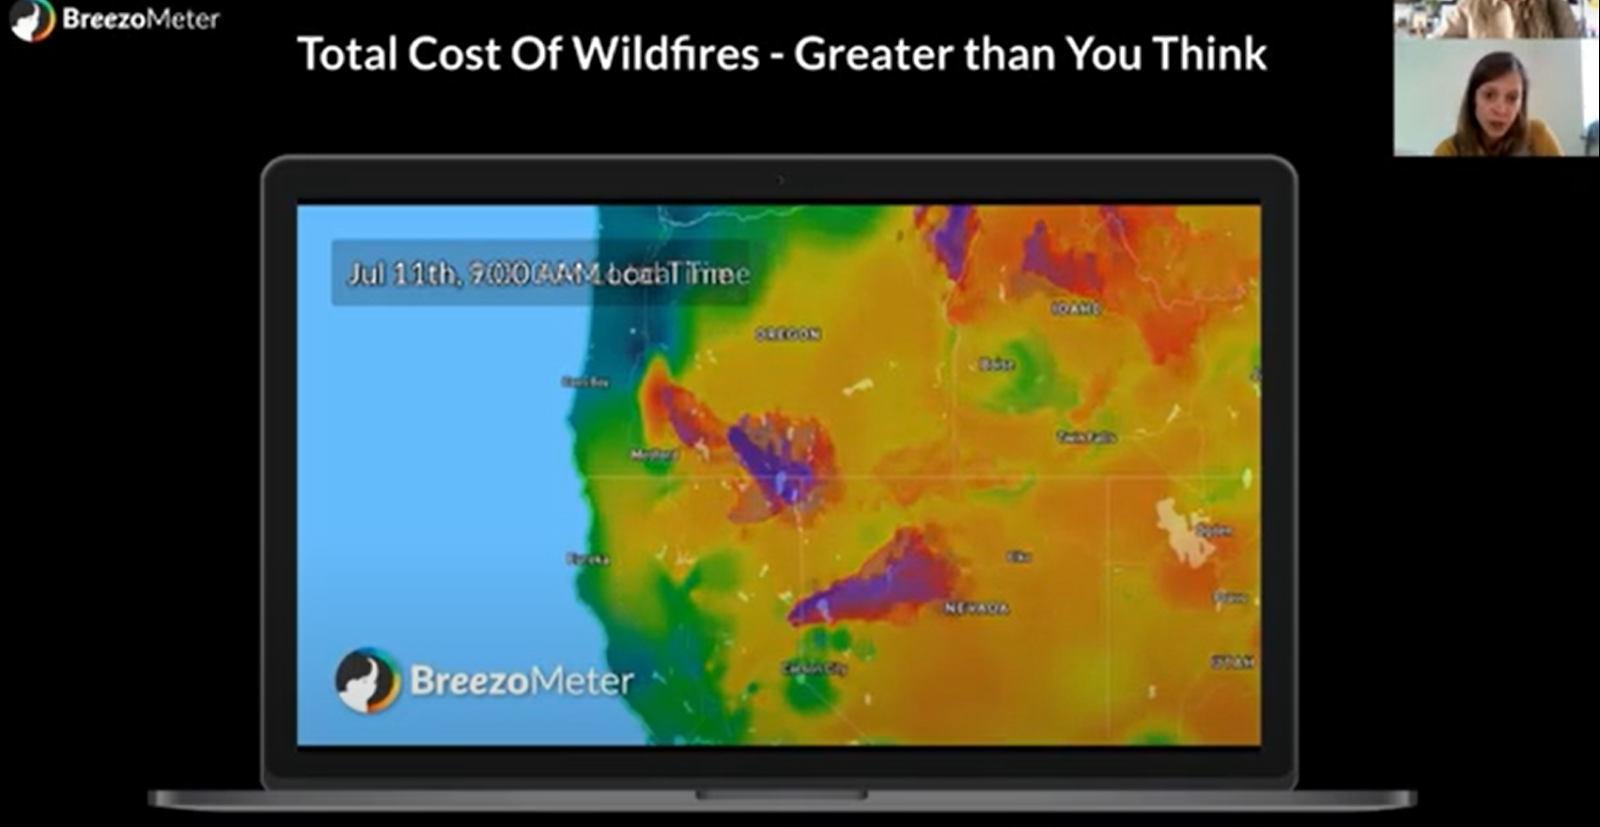 Total Cost of Wildfires - Greater Than You Think